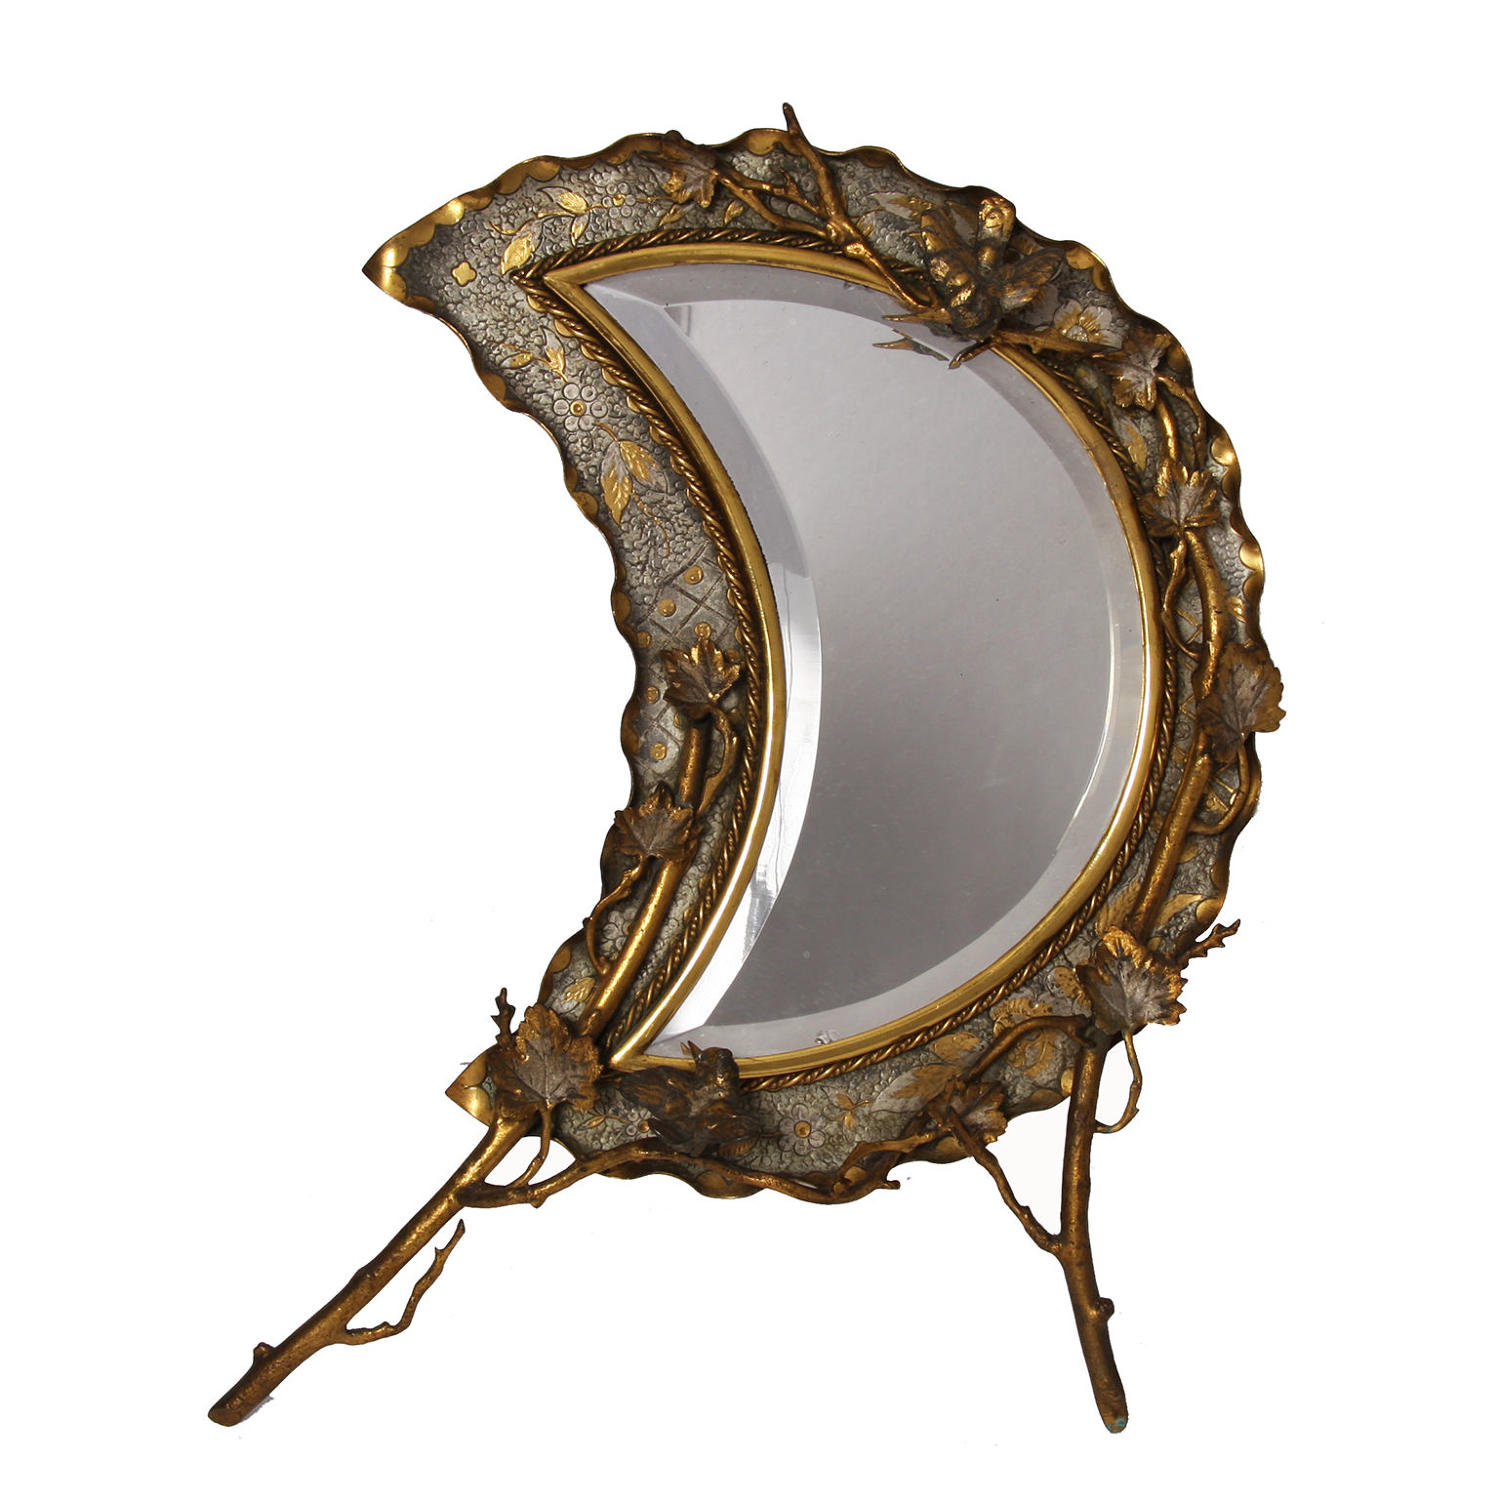 Brass Crescent Moon Table Top Mirror